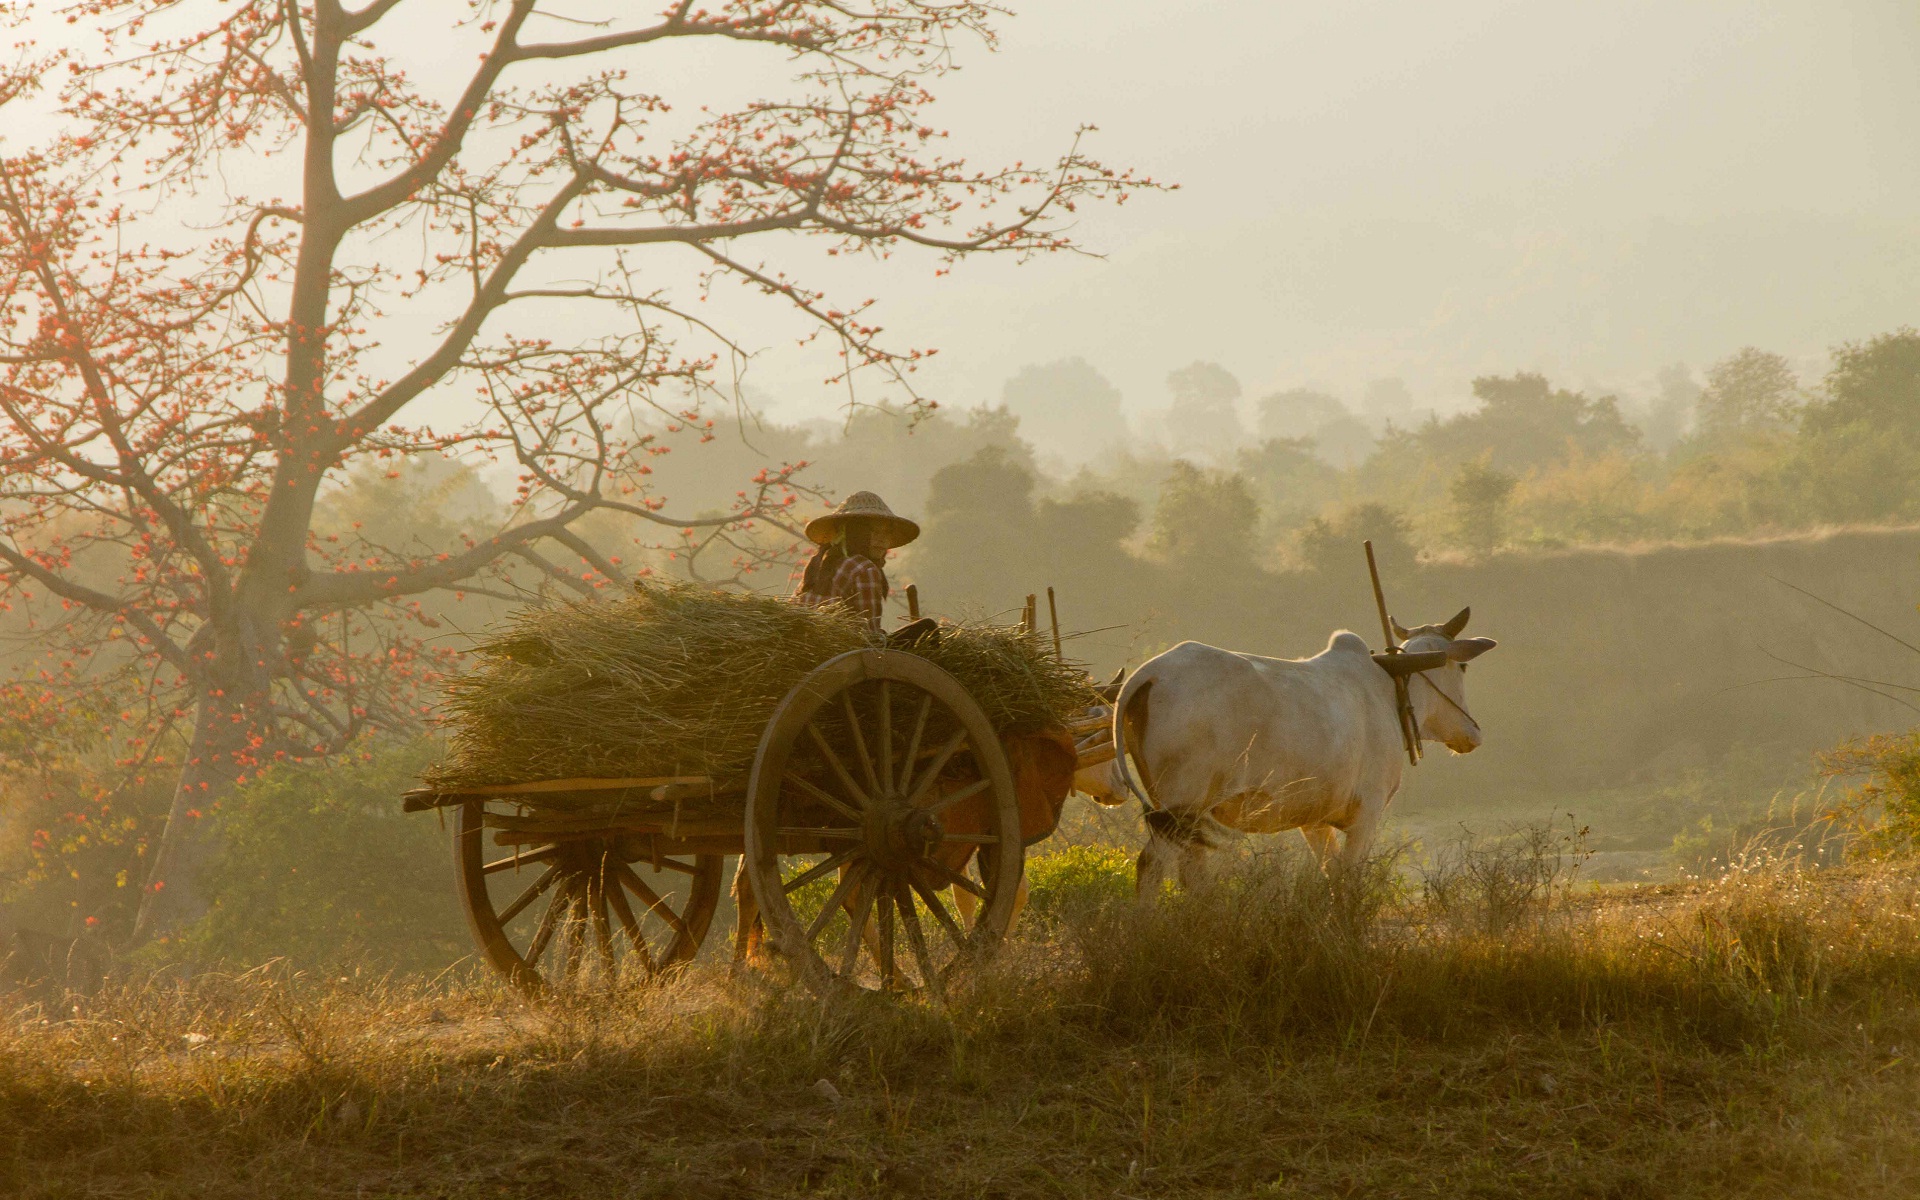 wallpaper for home wall india,vehicle,cart,atmospheric phenomenon,oxcart,rural area